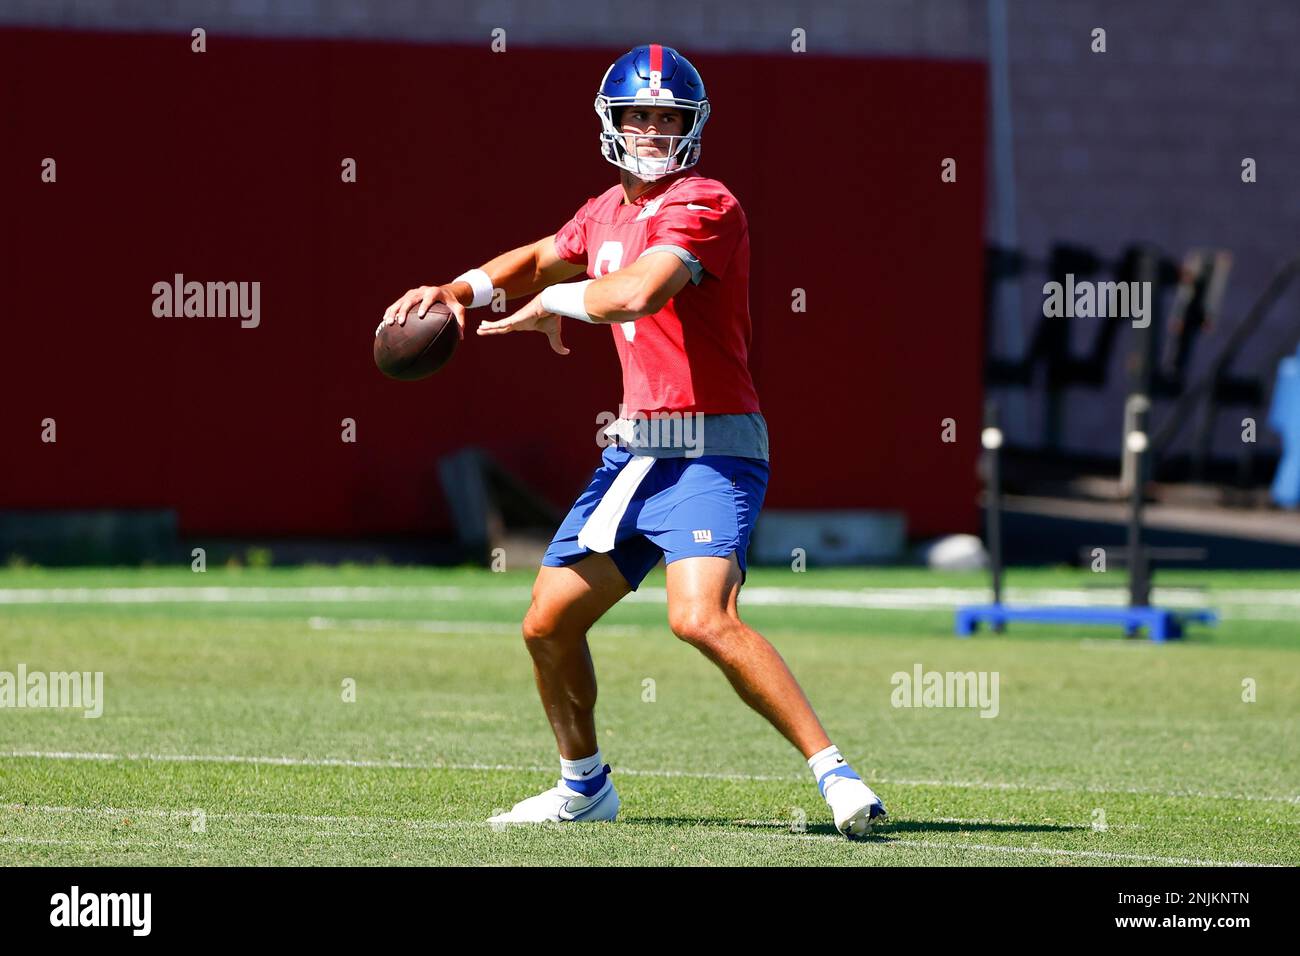 EAST RUTHERFORD, NJ - JULY 30: Daniel Jones (8) New York Giants quarterback  drops back to pass during training camp on July 30, 2022 at Quest  Diagnostics Training Center in East Rutherford